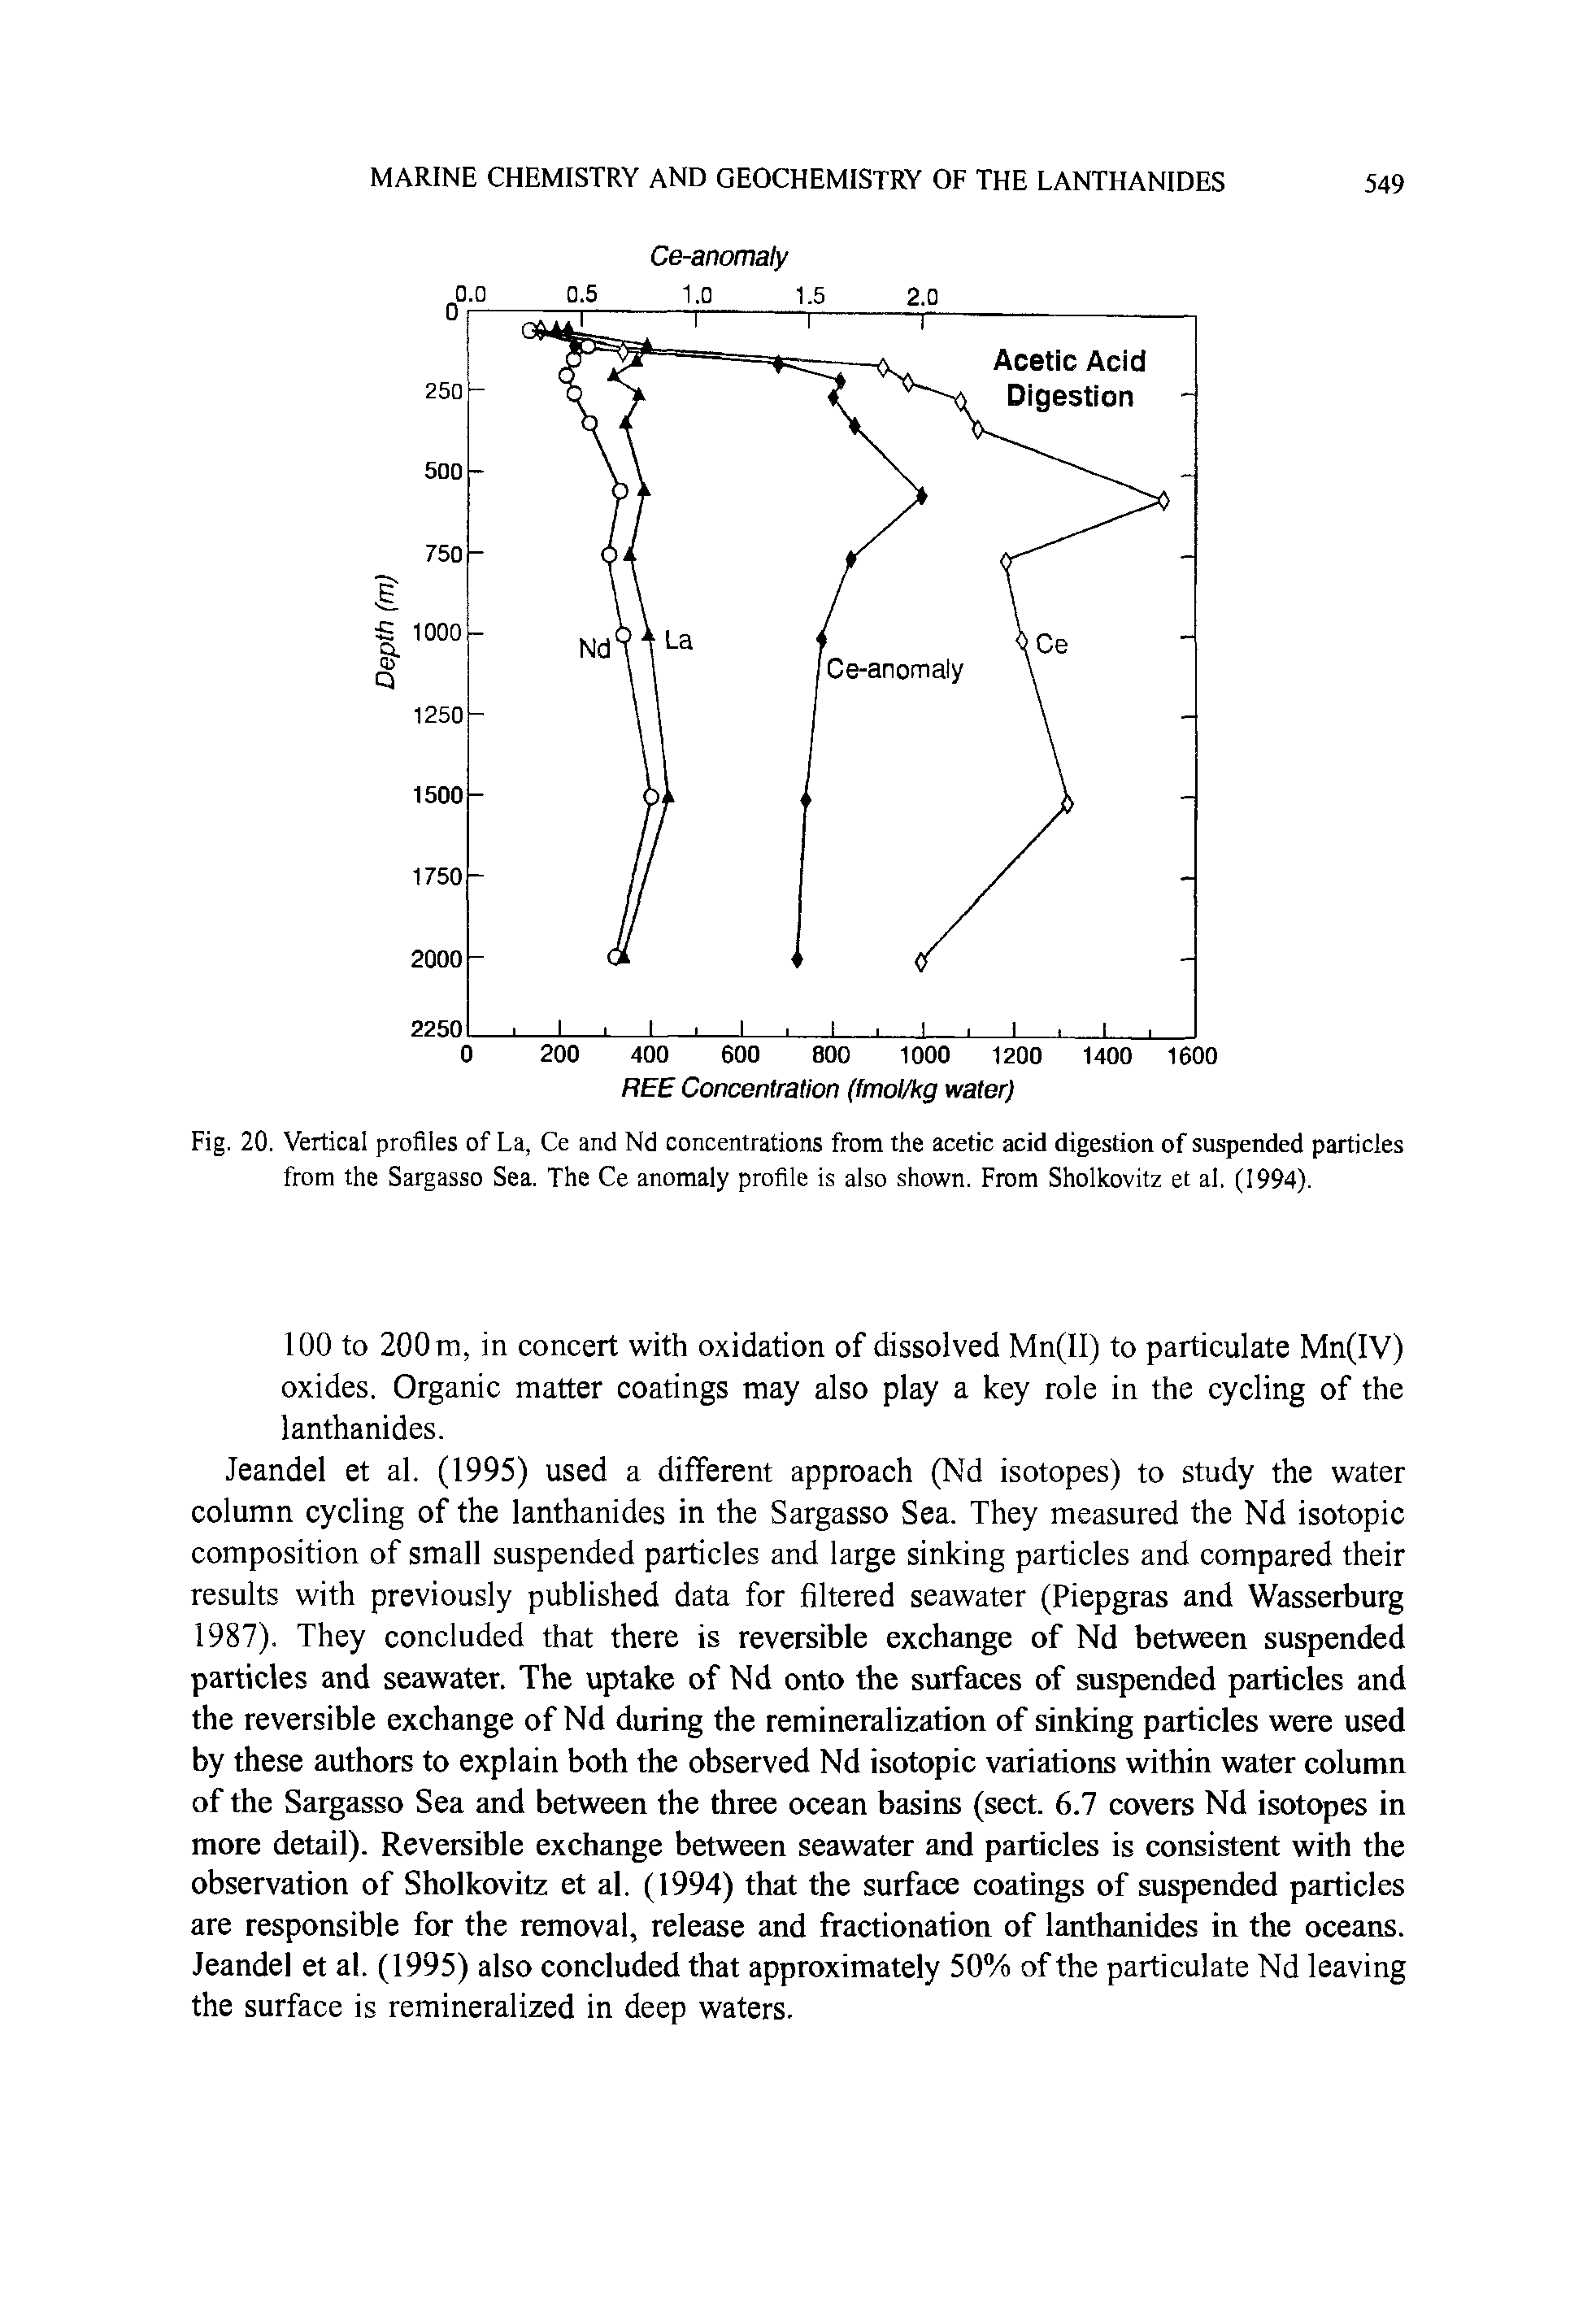 Fig. 20. Vertical profiles of La, Ce and Nd concentrations from the acetic acid digestion of suspended particles from the Sargasso Sea. The Ce anomaly profile is also shown. From Sholkovitz et al. (1994).